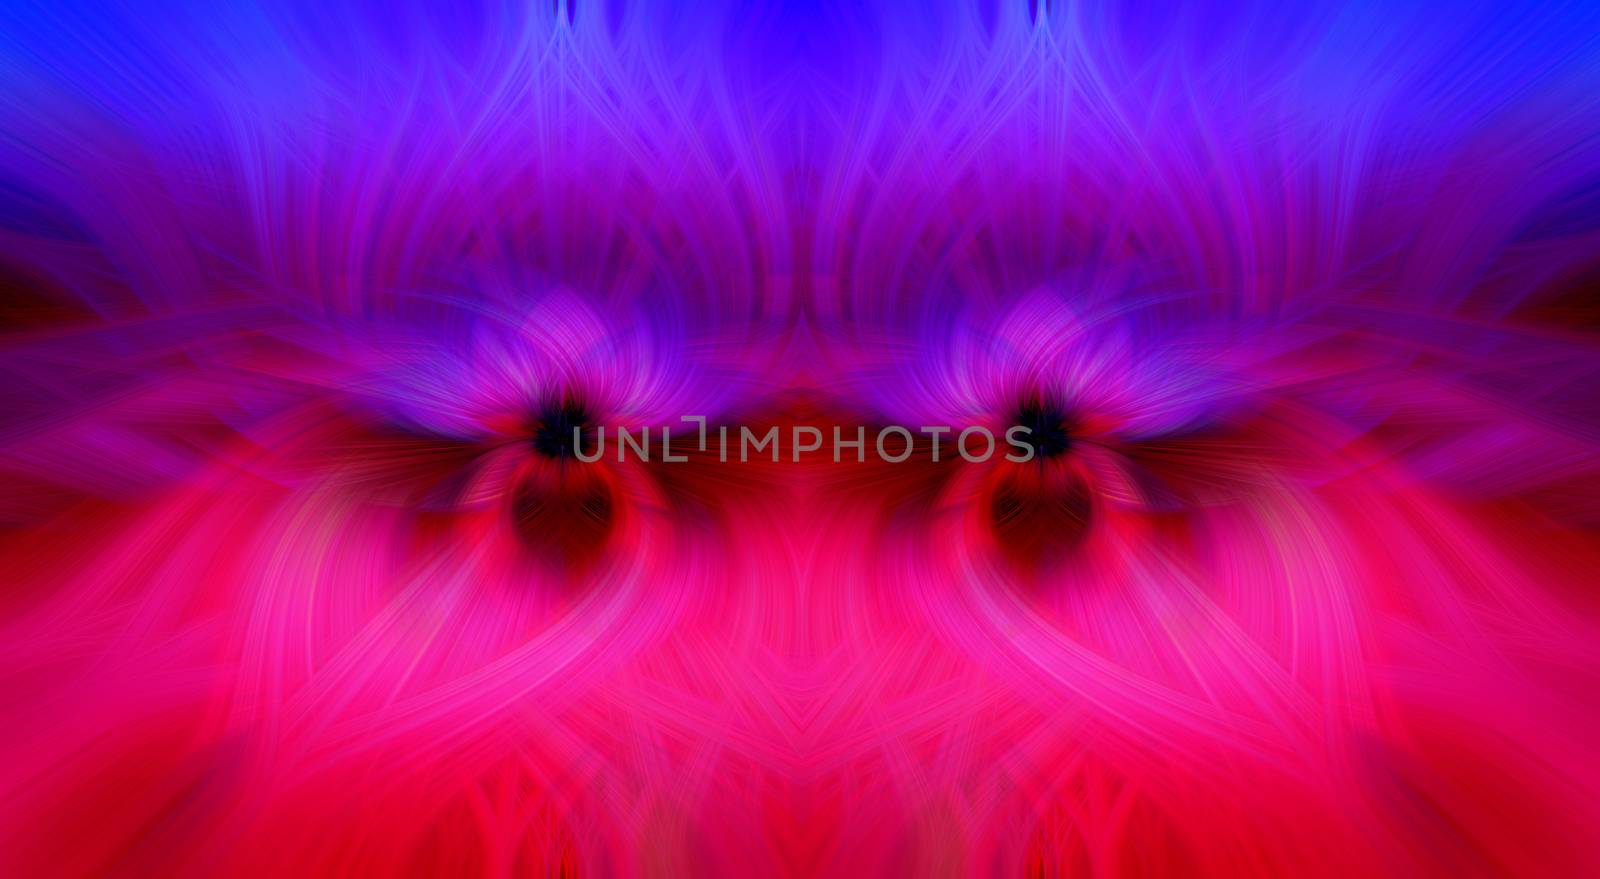 Beautiful abstract intertwined 3d fibers forming an ornament made of various symmetrical shapes. Pink, purple, red, and blue colors. Illustration.